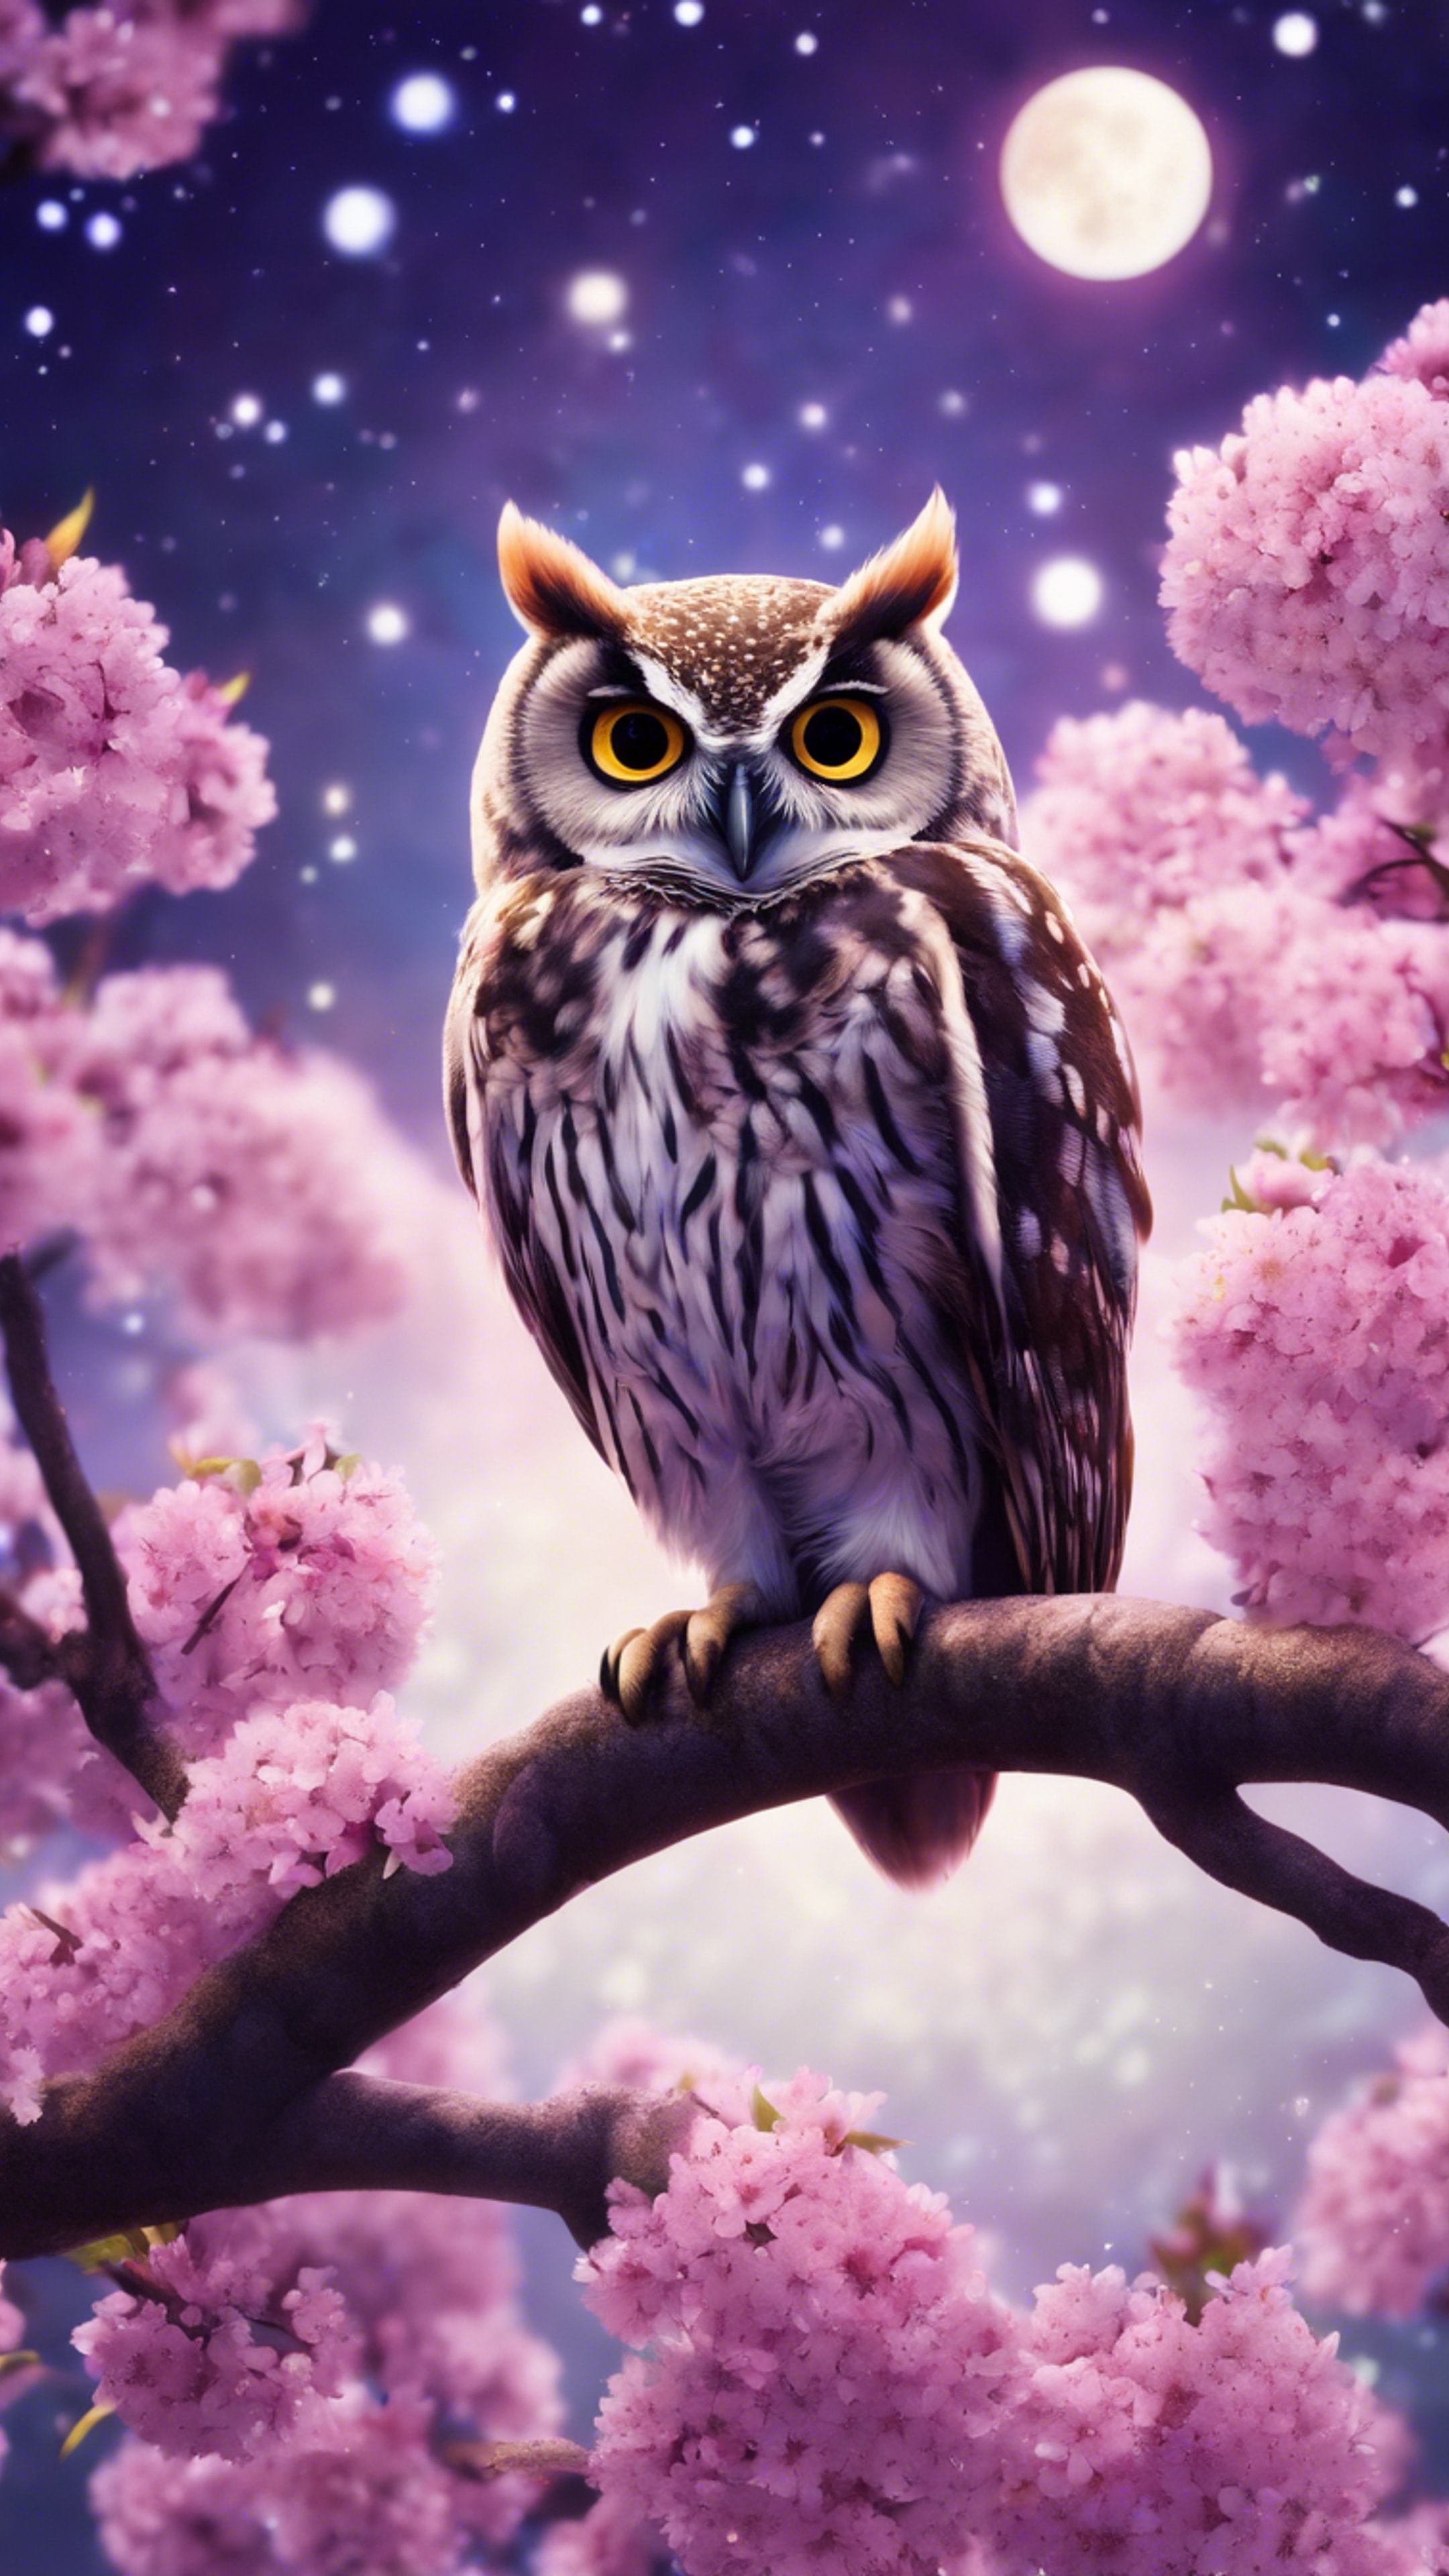 A cute kawaii style owl perched on a cherry blossom tree that blooms vibrant purple flowers, under a moonlit starry night. Tapet[d4c437875b7e43ac9353]